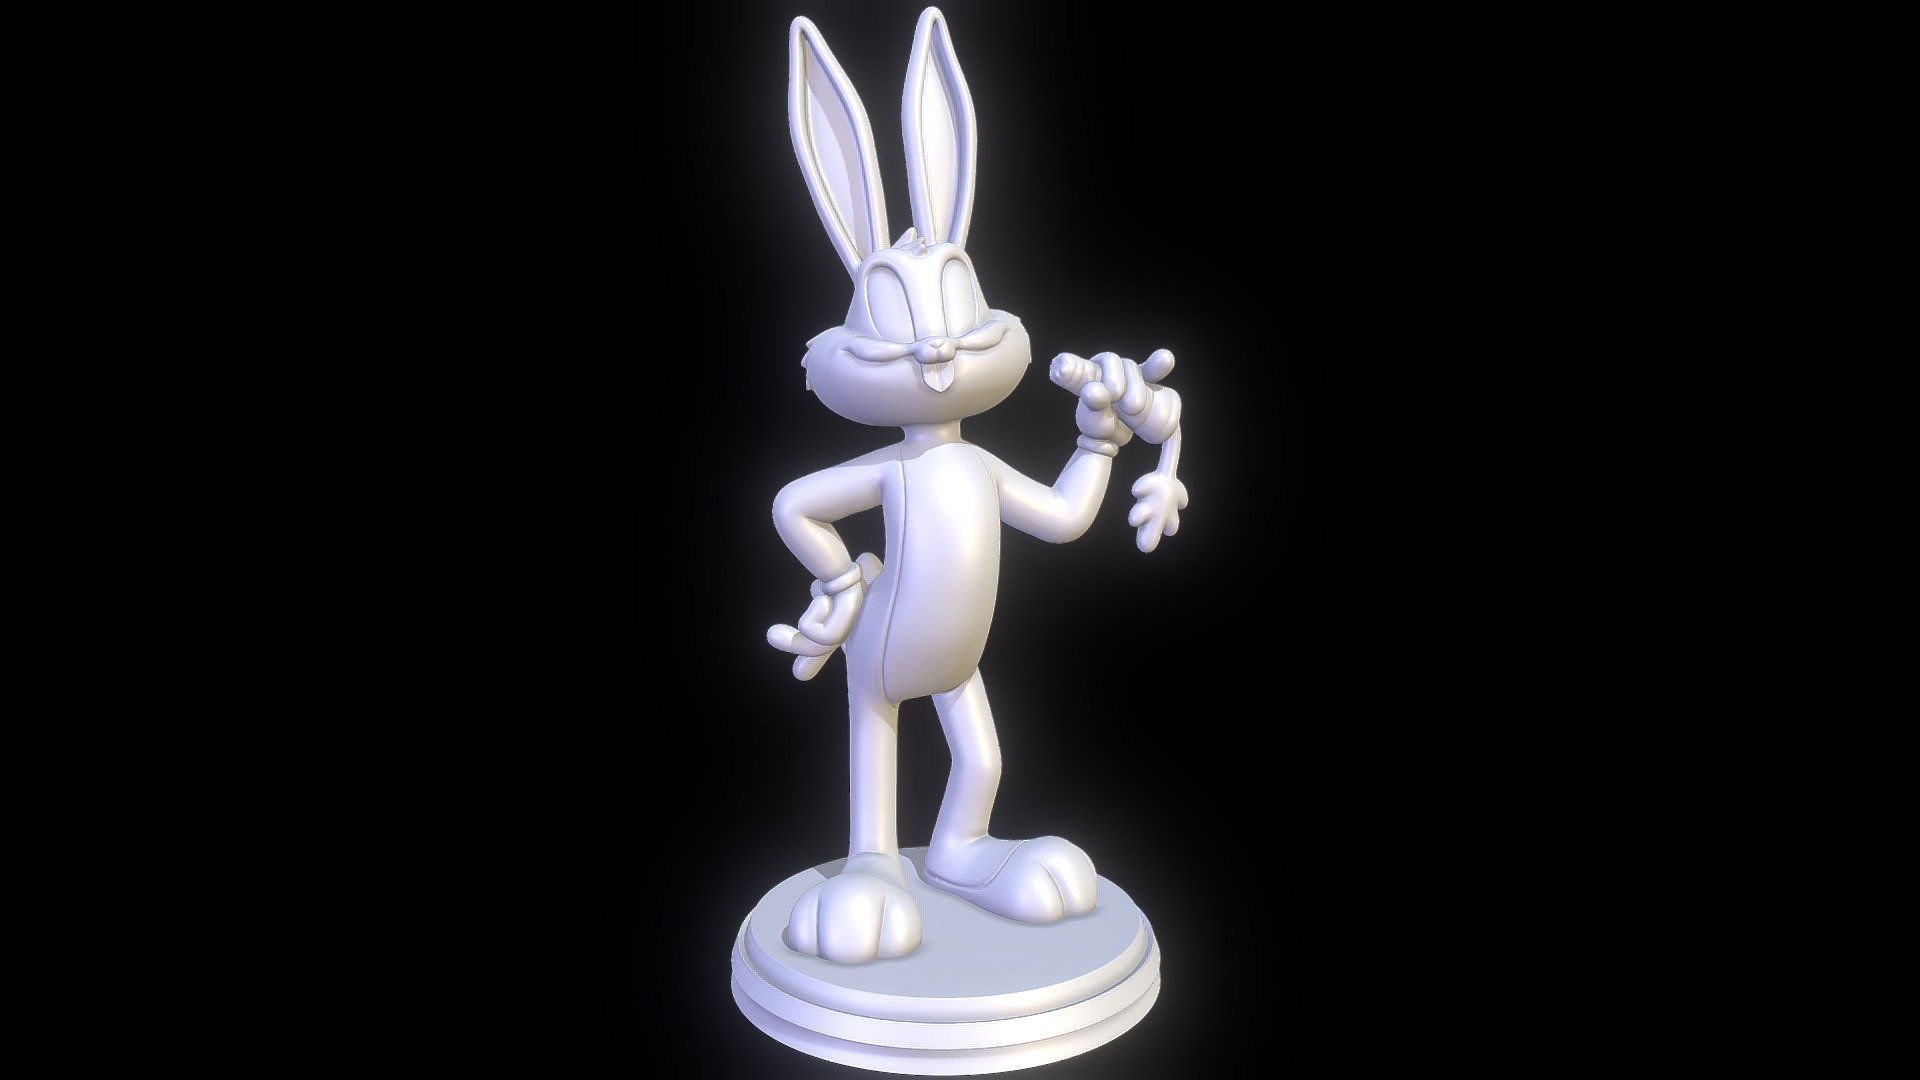 Character from Looney Tunes

See the model colored here https://www.deviantart.com/sillytoys/art/Bugs-Bunny-Looney-Tunes-3D-print-model-914670338 - Bugs Bunny - Looney Tunes 3D print - Buy Royalty Free 3D model by SillyToys 3d model